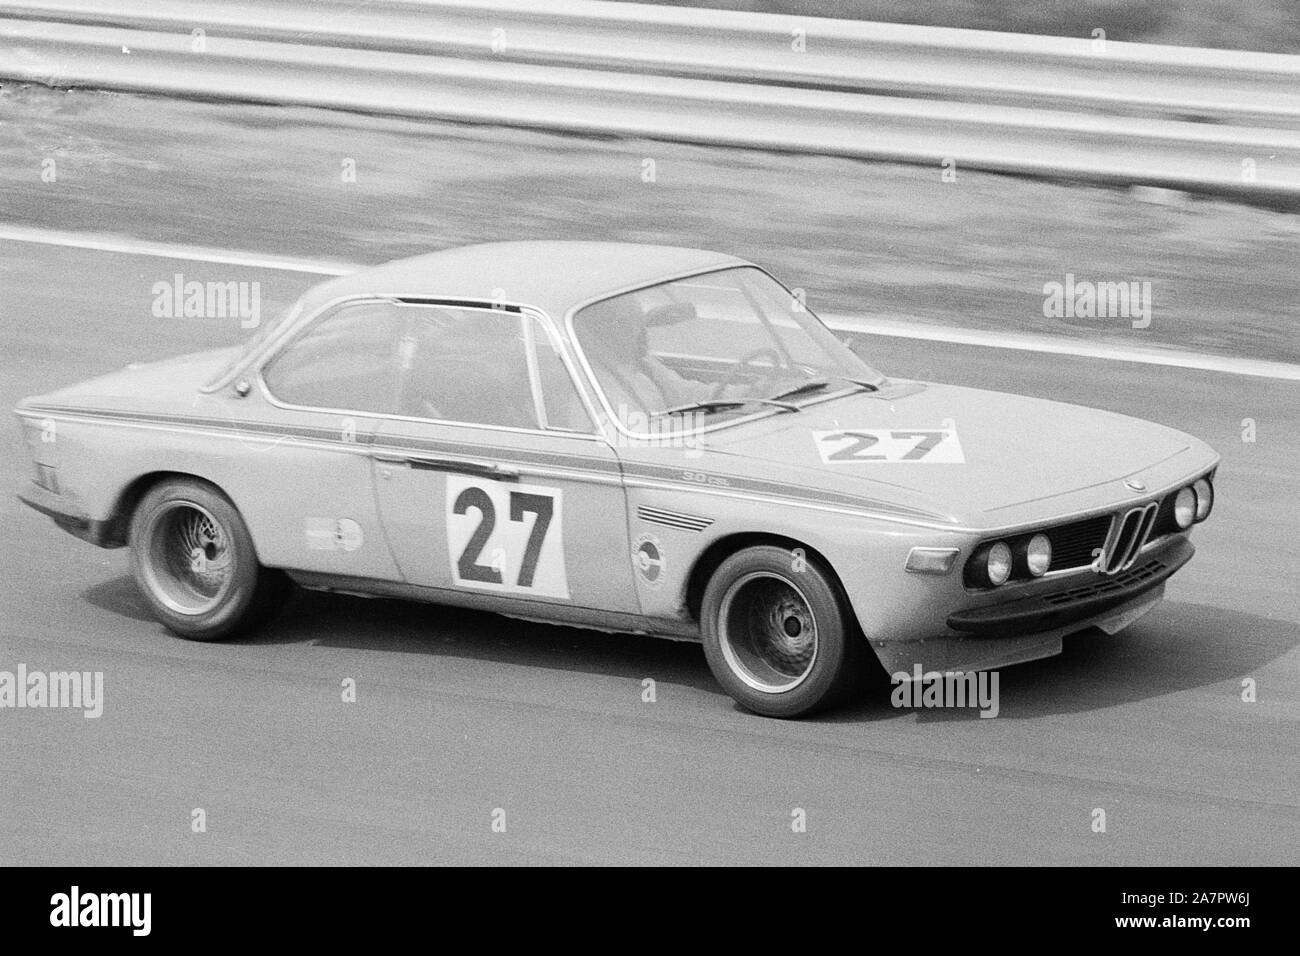 BMW 3.0 CSL during 1970s Touring Car Race at the Nuerburgring, Germany Stock Photo